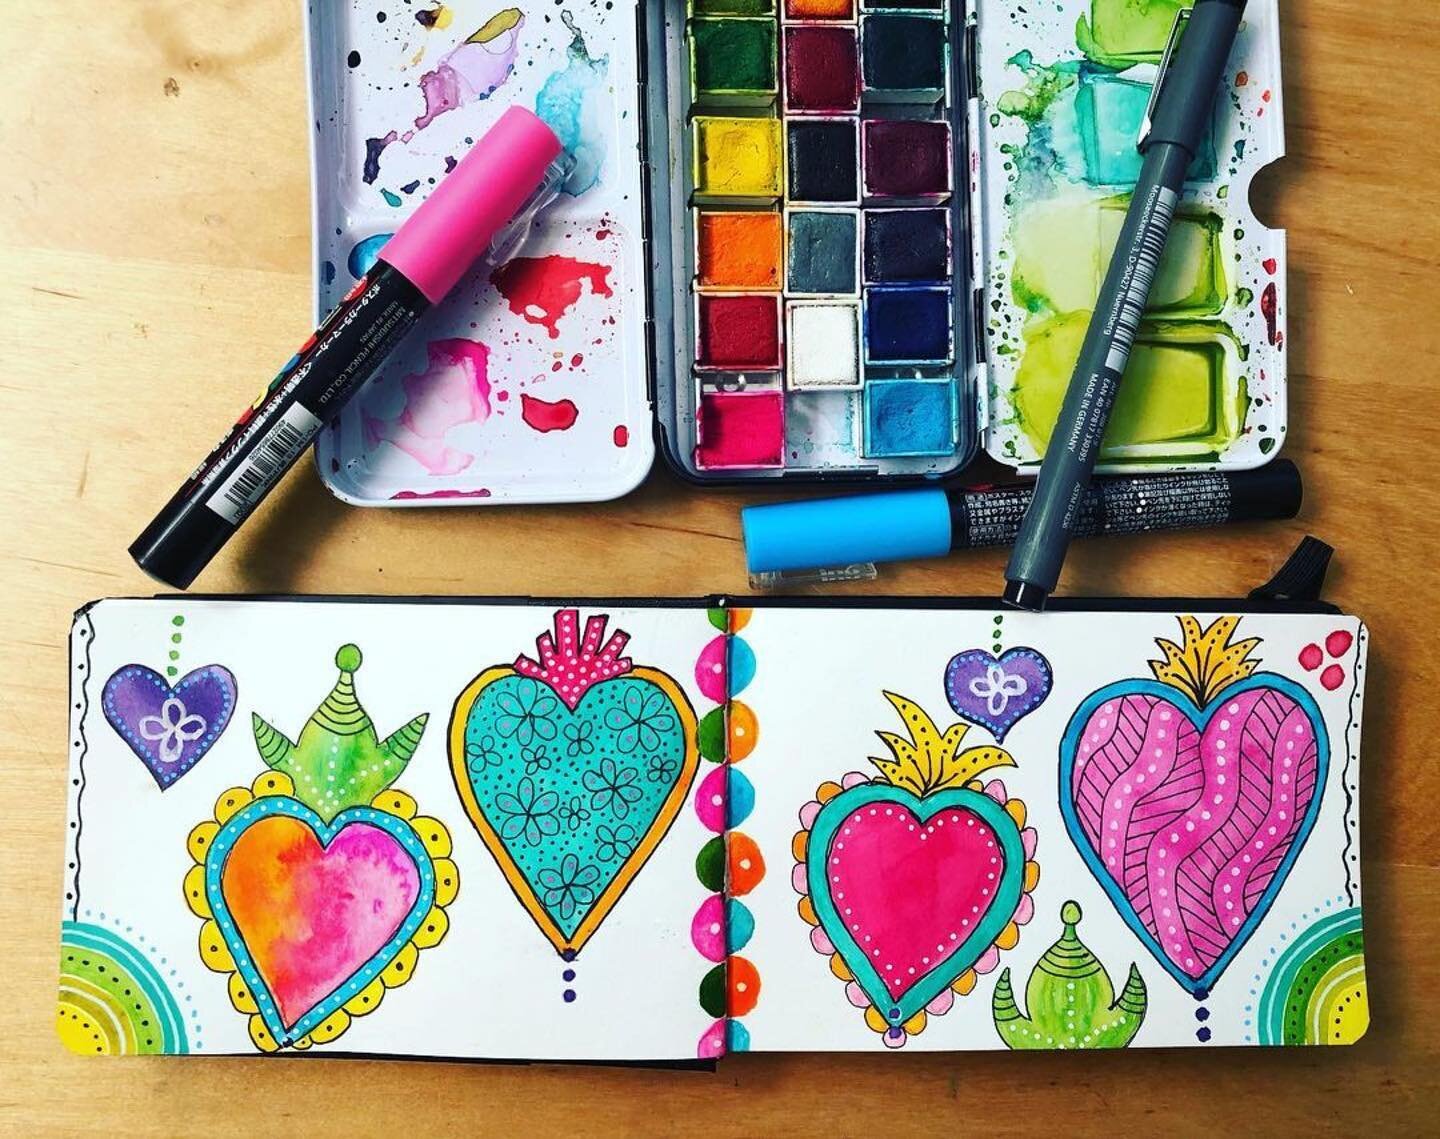 We love these playful Milagro Hearts created by @kcammack88 in our recent Watercolor Reset Challenge!

・・・
Day 3 of the 4 day #wonderfulwatercolorreset challenge. It was fun adding all the detail with the black, white and Posca pens. #smallfieldjourn